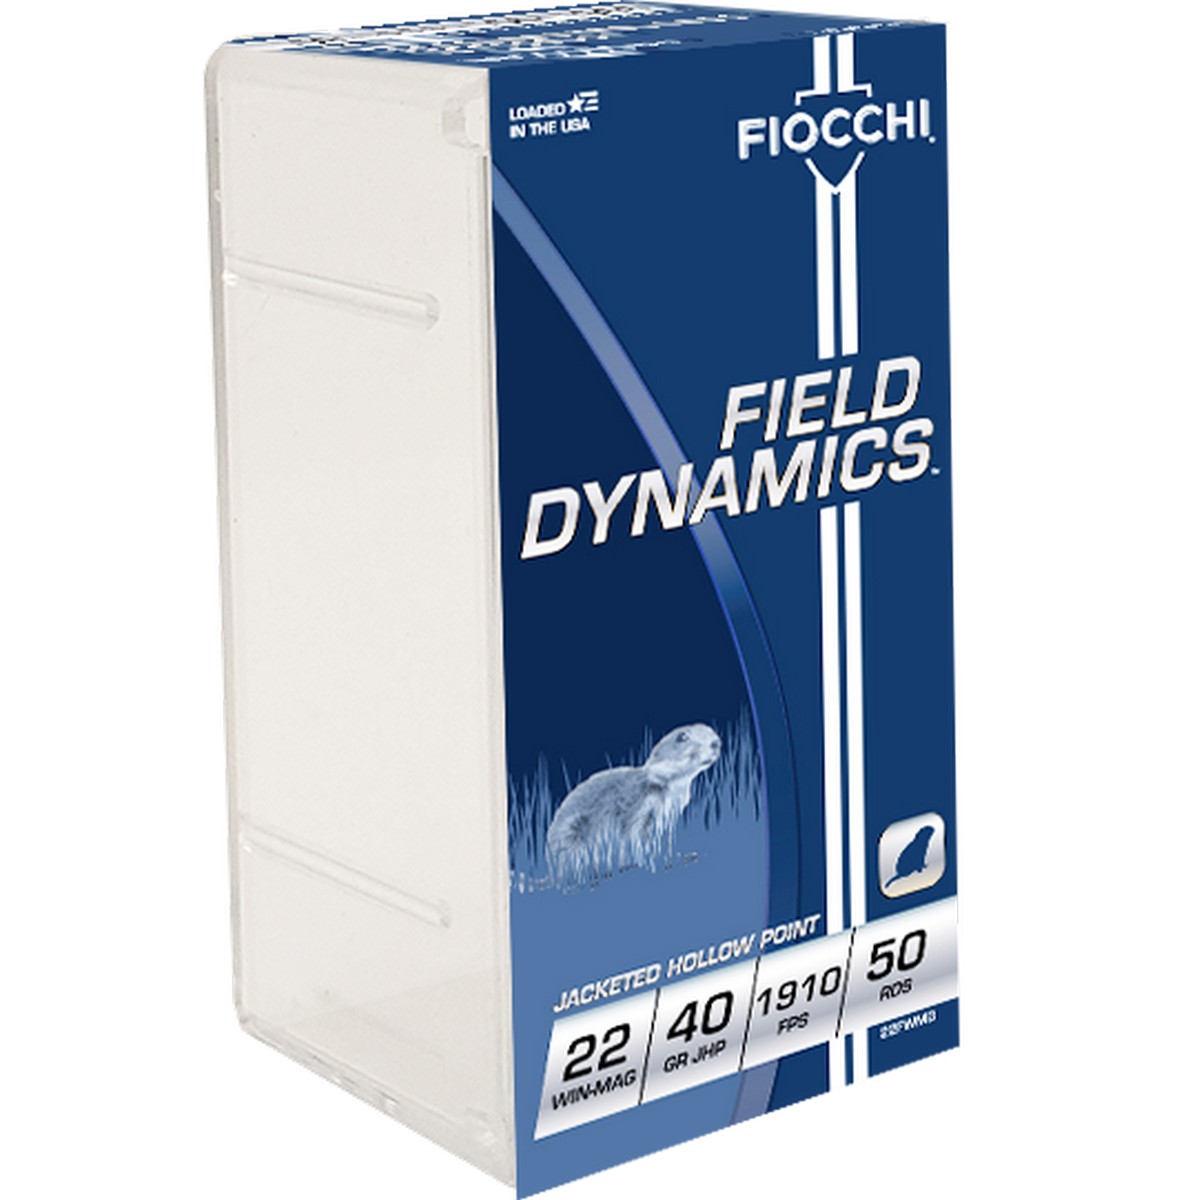 cchi Field Dynamics 22 Mag 40 Gr Jacketed Hollow Point Ammo